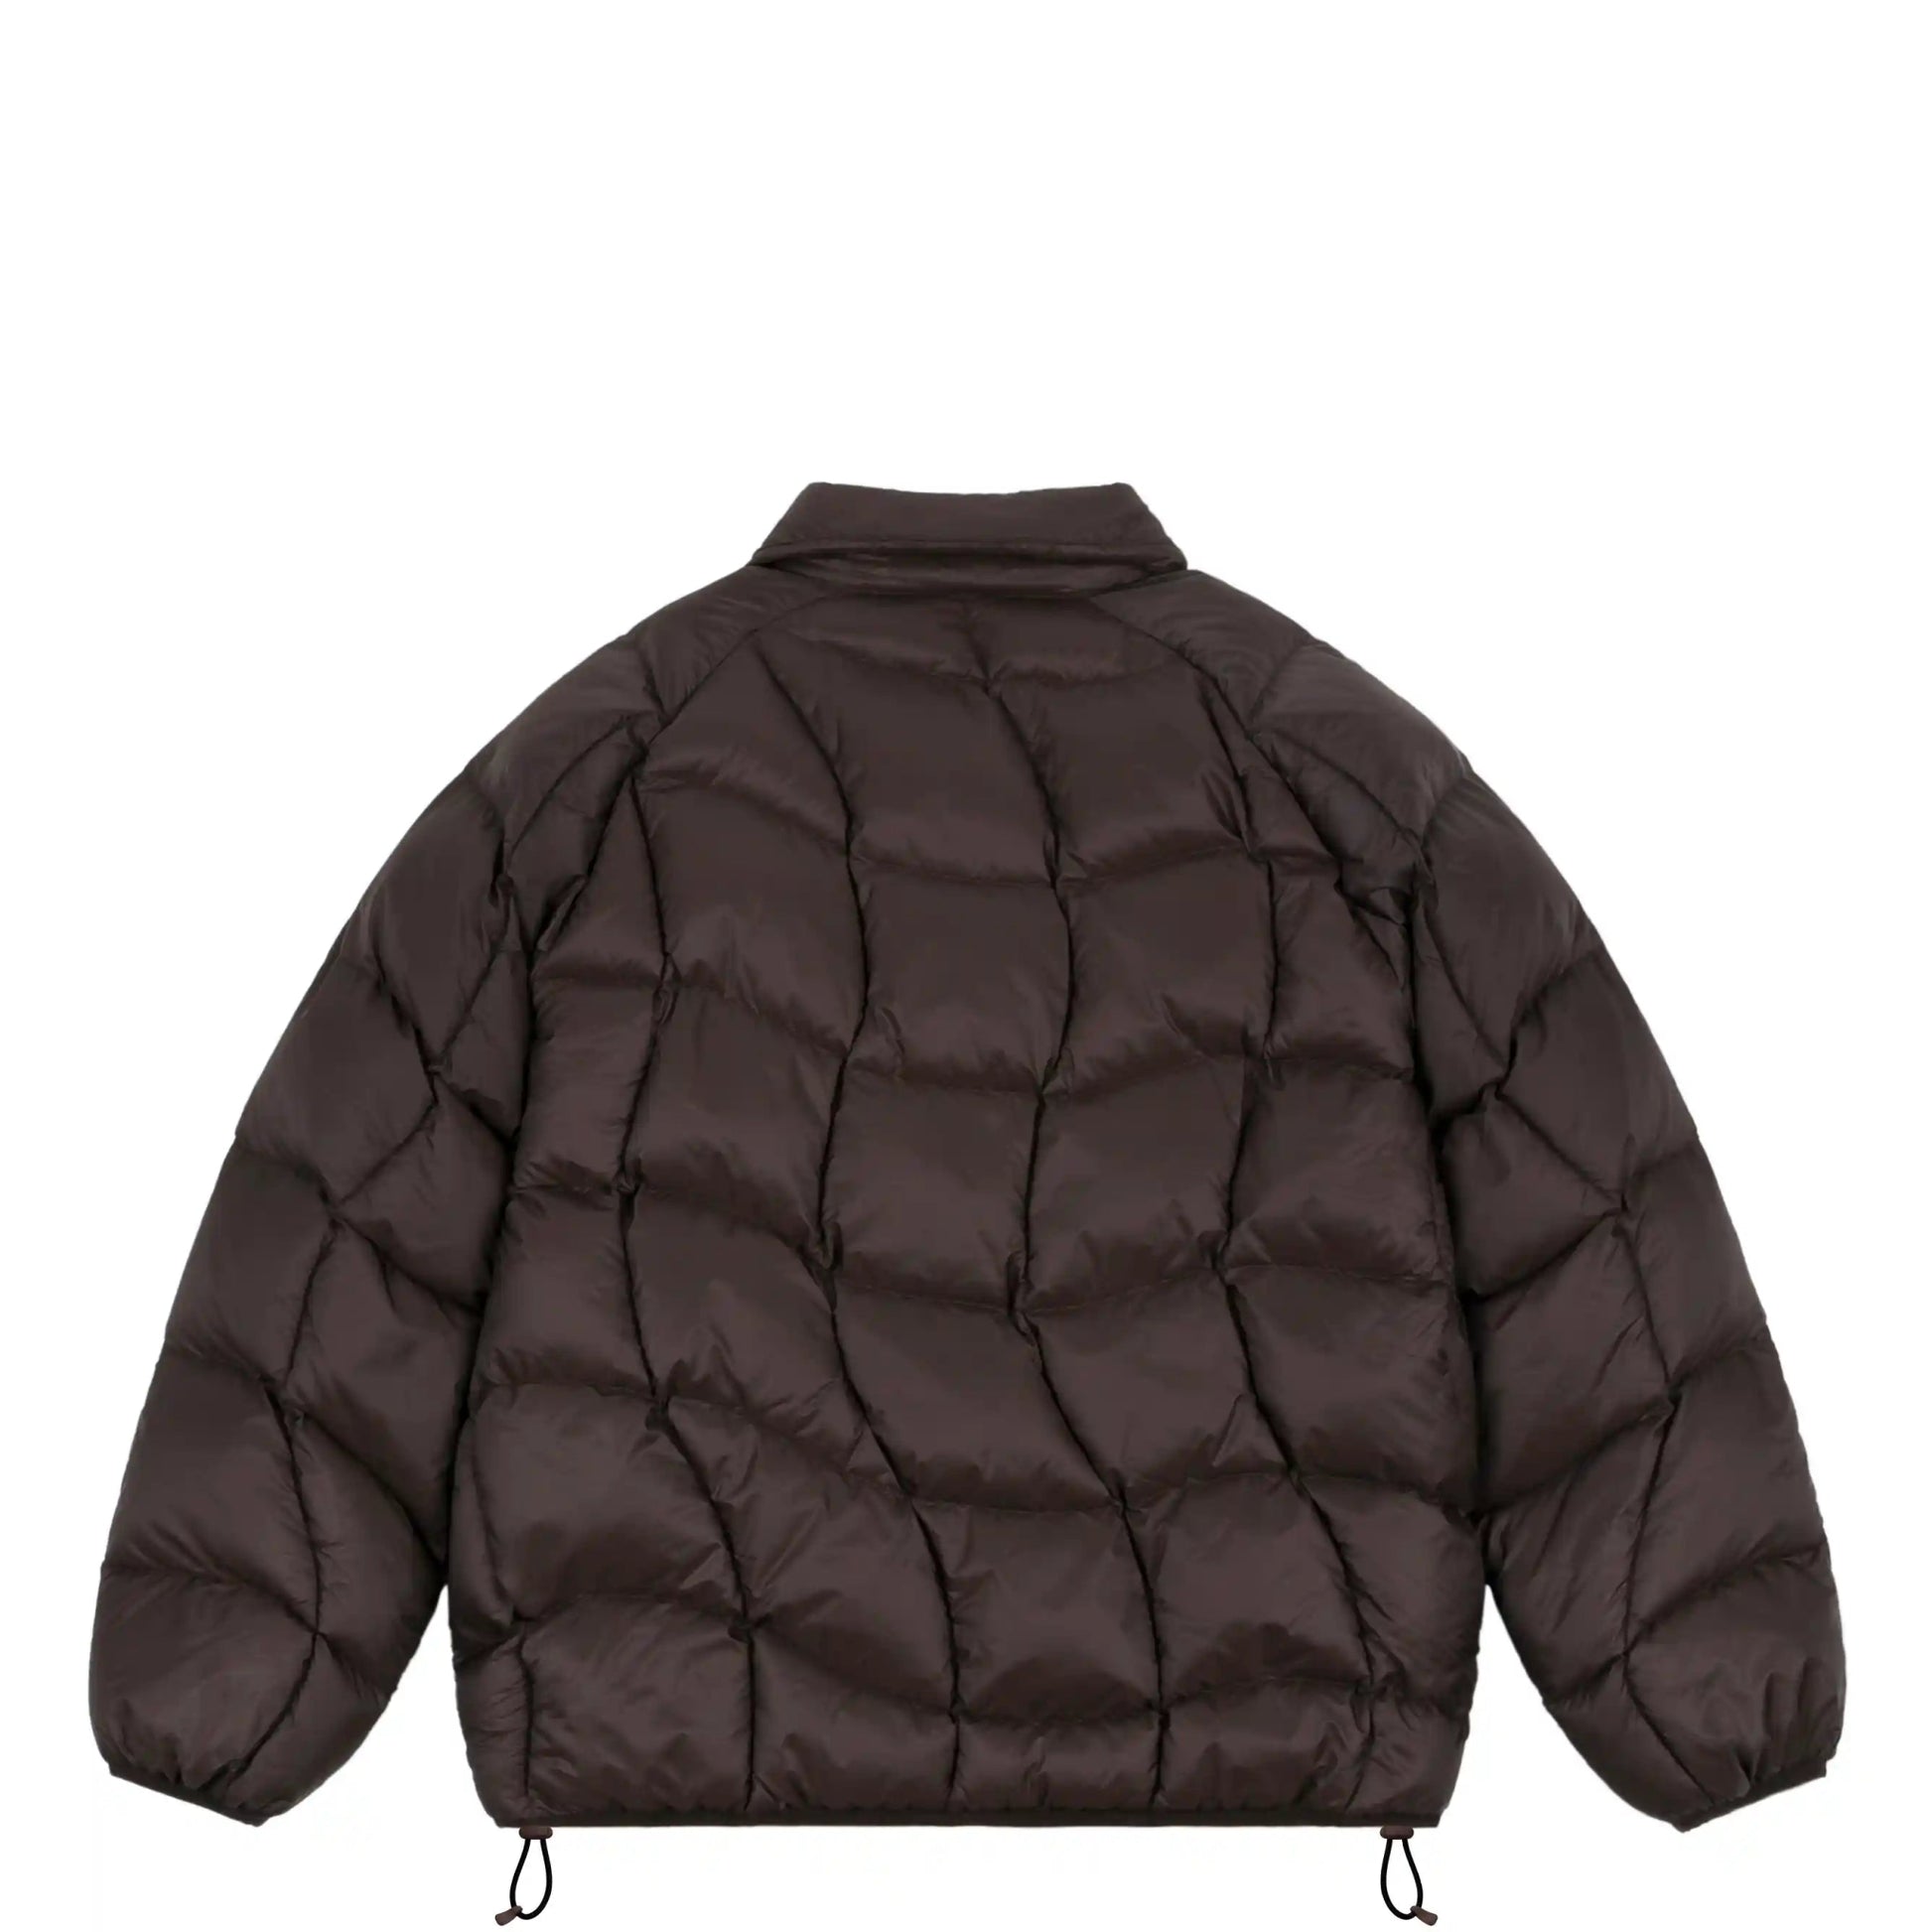 Dime Midweight Wave Puffer Jacket, espresso